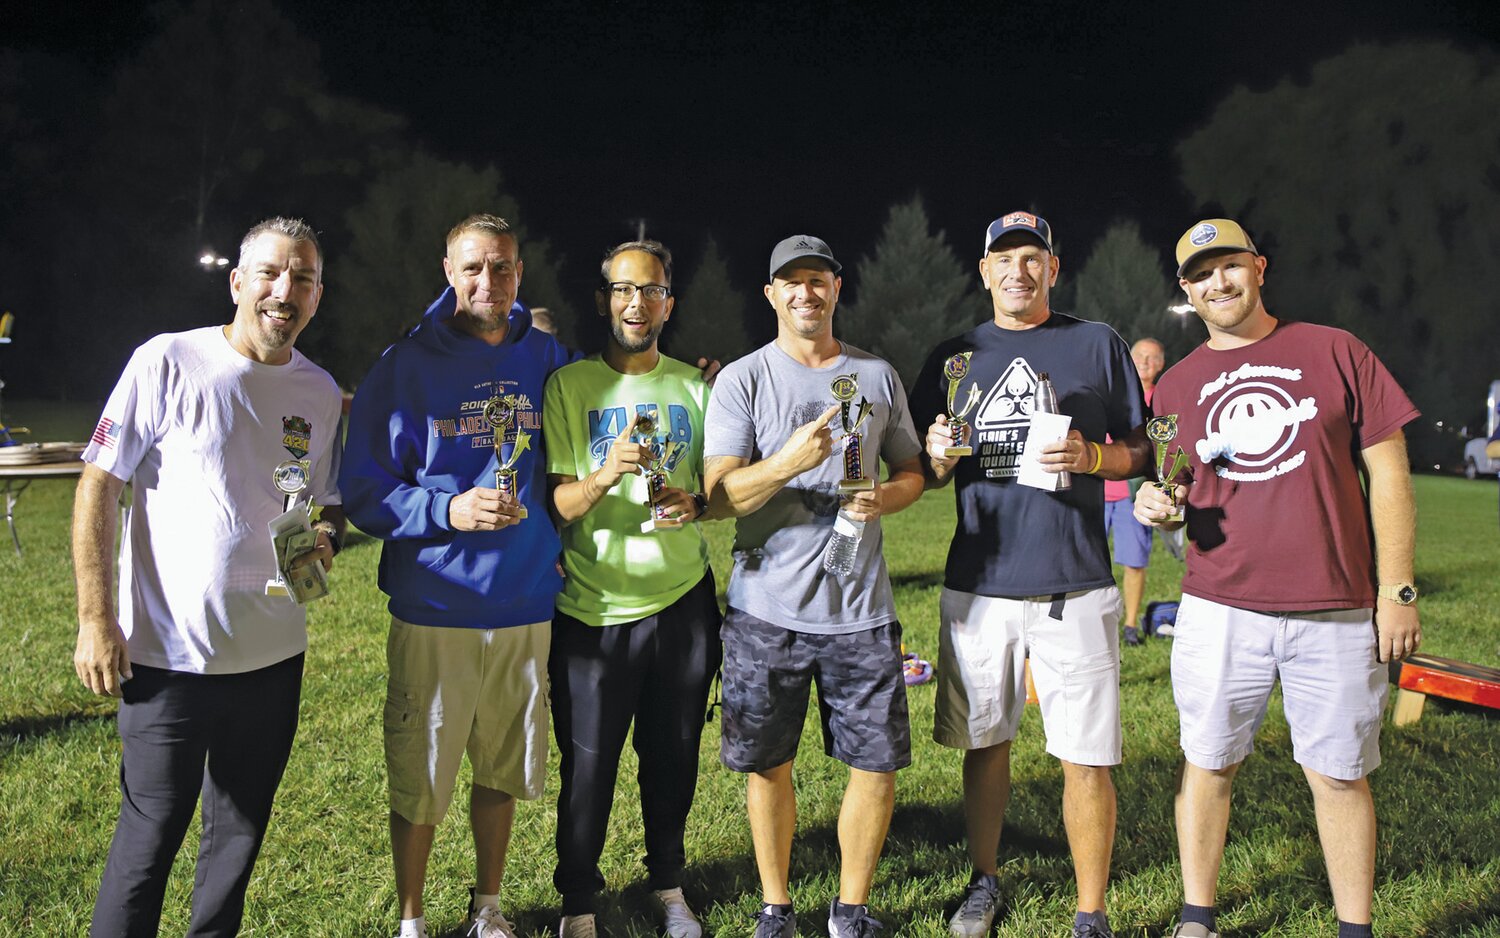 The top three teams of the cornhole tournament won cash prizes ranging from $1,200 to $300 as well as tournament trophies. From left are the second-place Bag Boys team, first-place winners The Outsiders and third-place team Dietz.